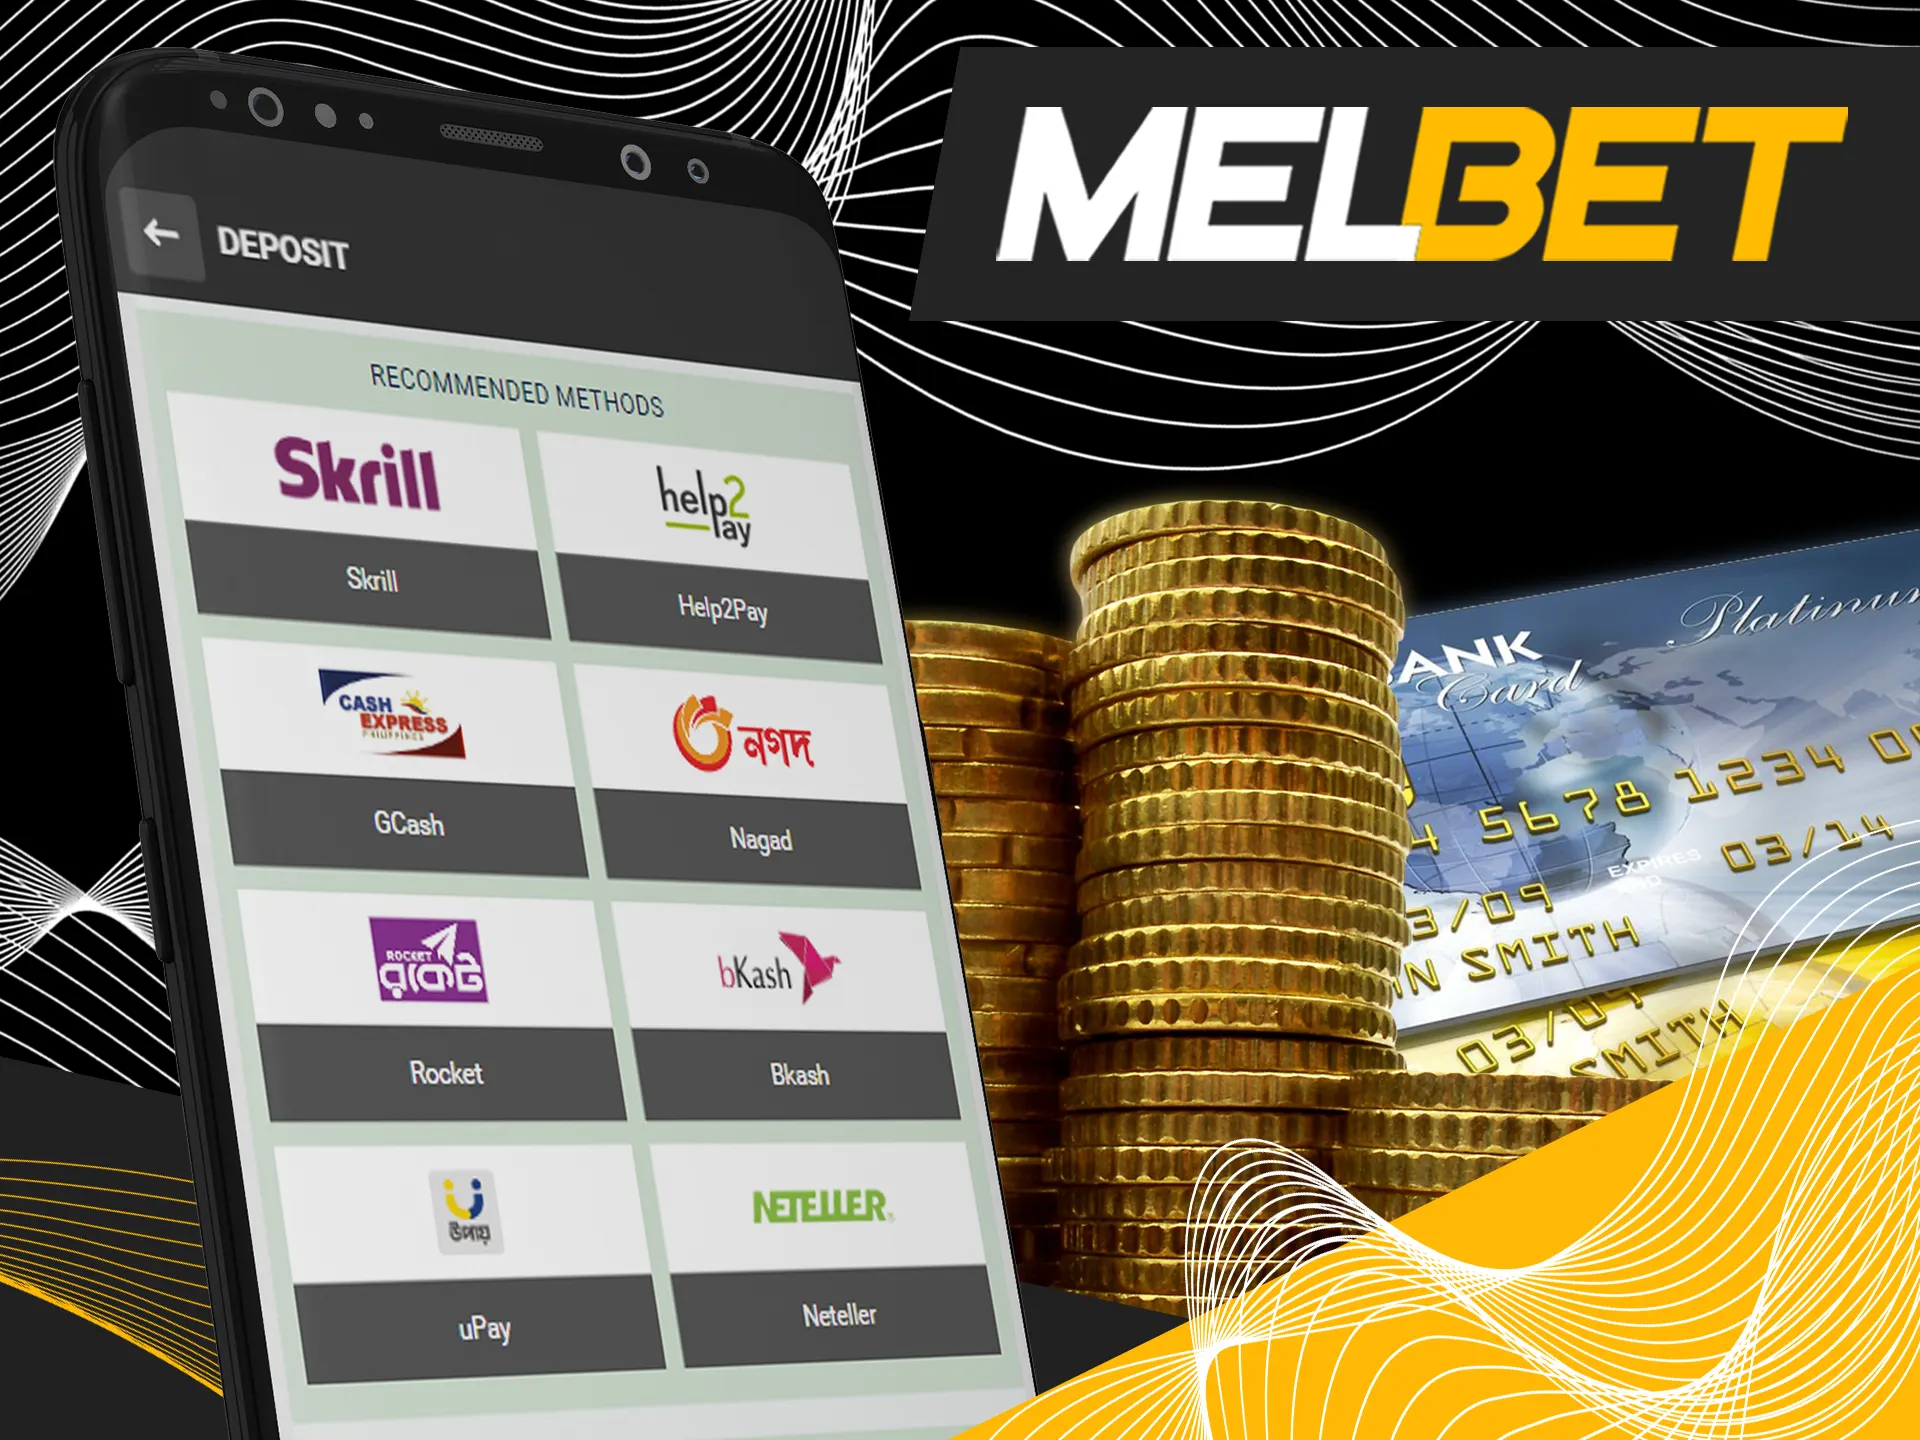 Deposit and withdraw money from Melbet without difficulties.